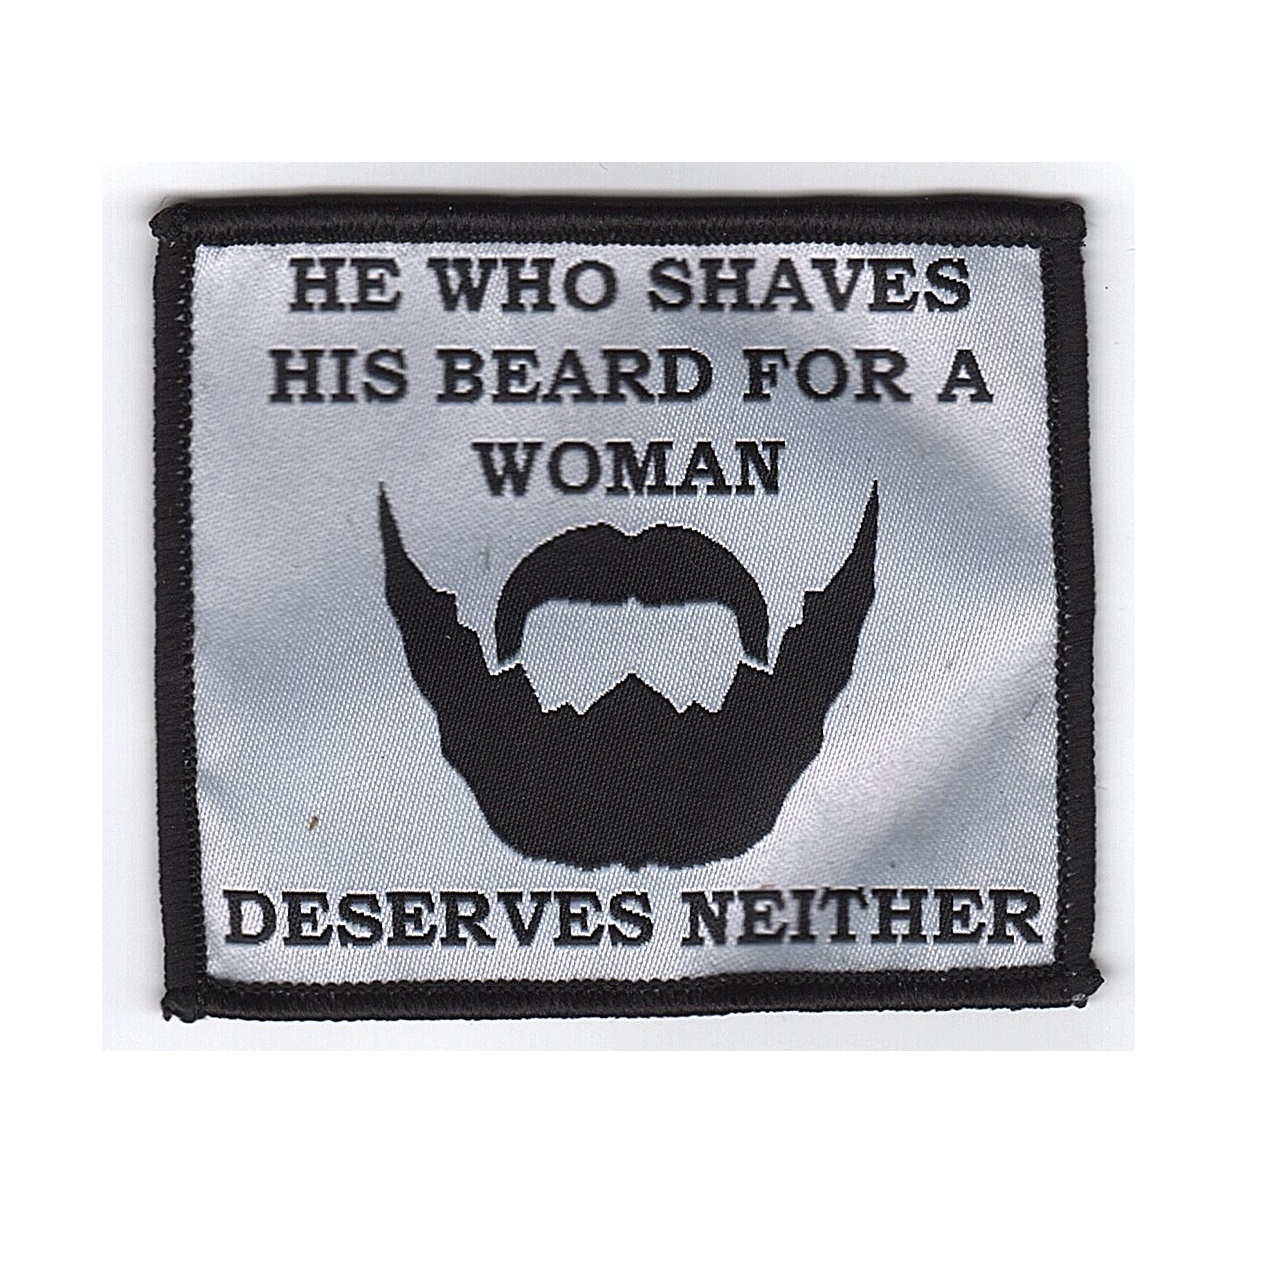 He who shaves his beard